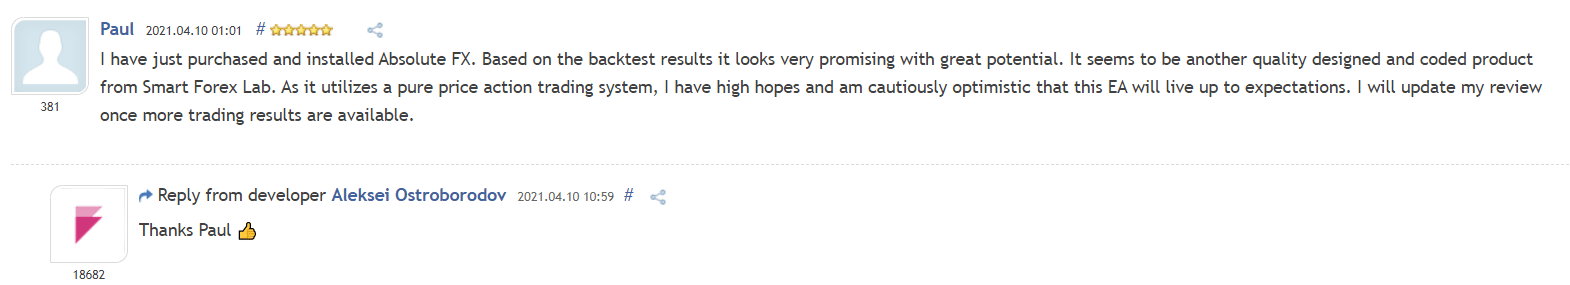 User reviews for Absolute on MQL5